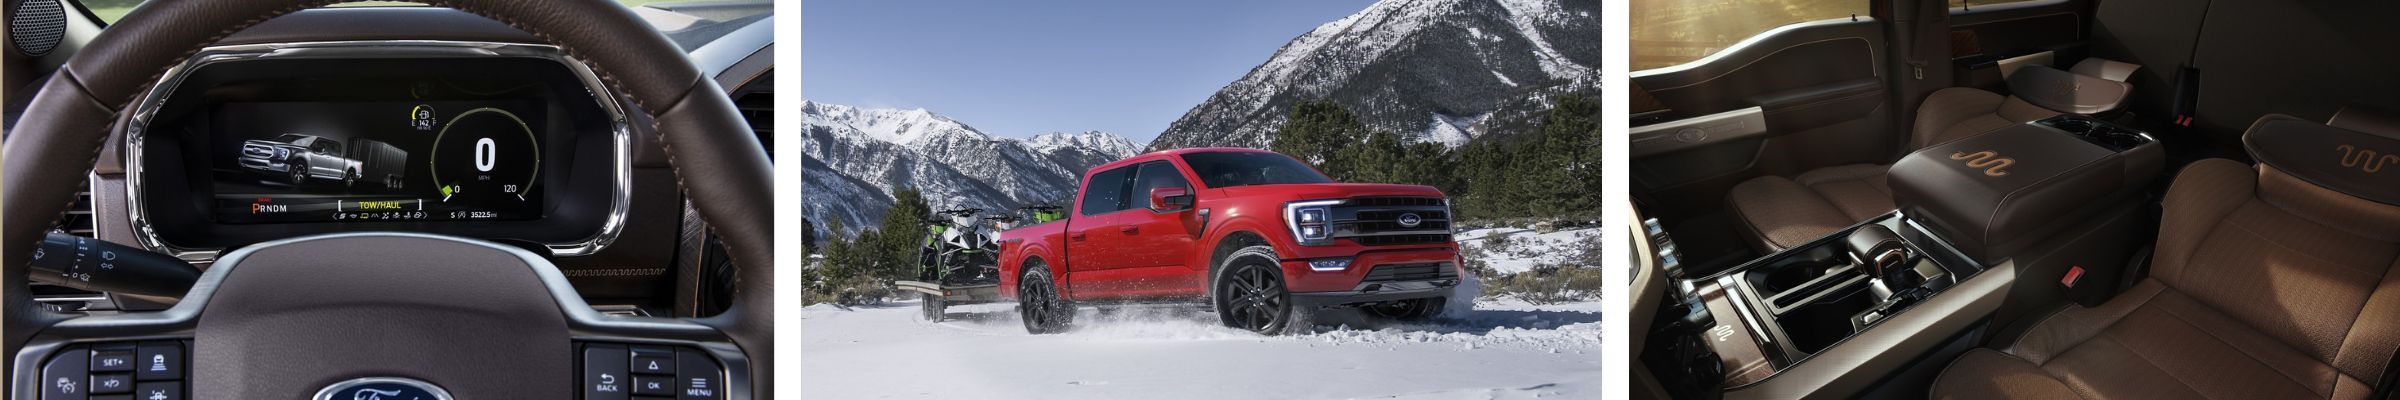 2022 Ford F-150 For Sale near Ellicott City MD